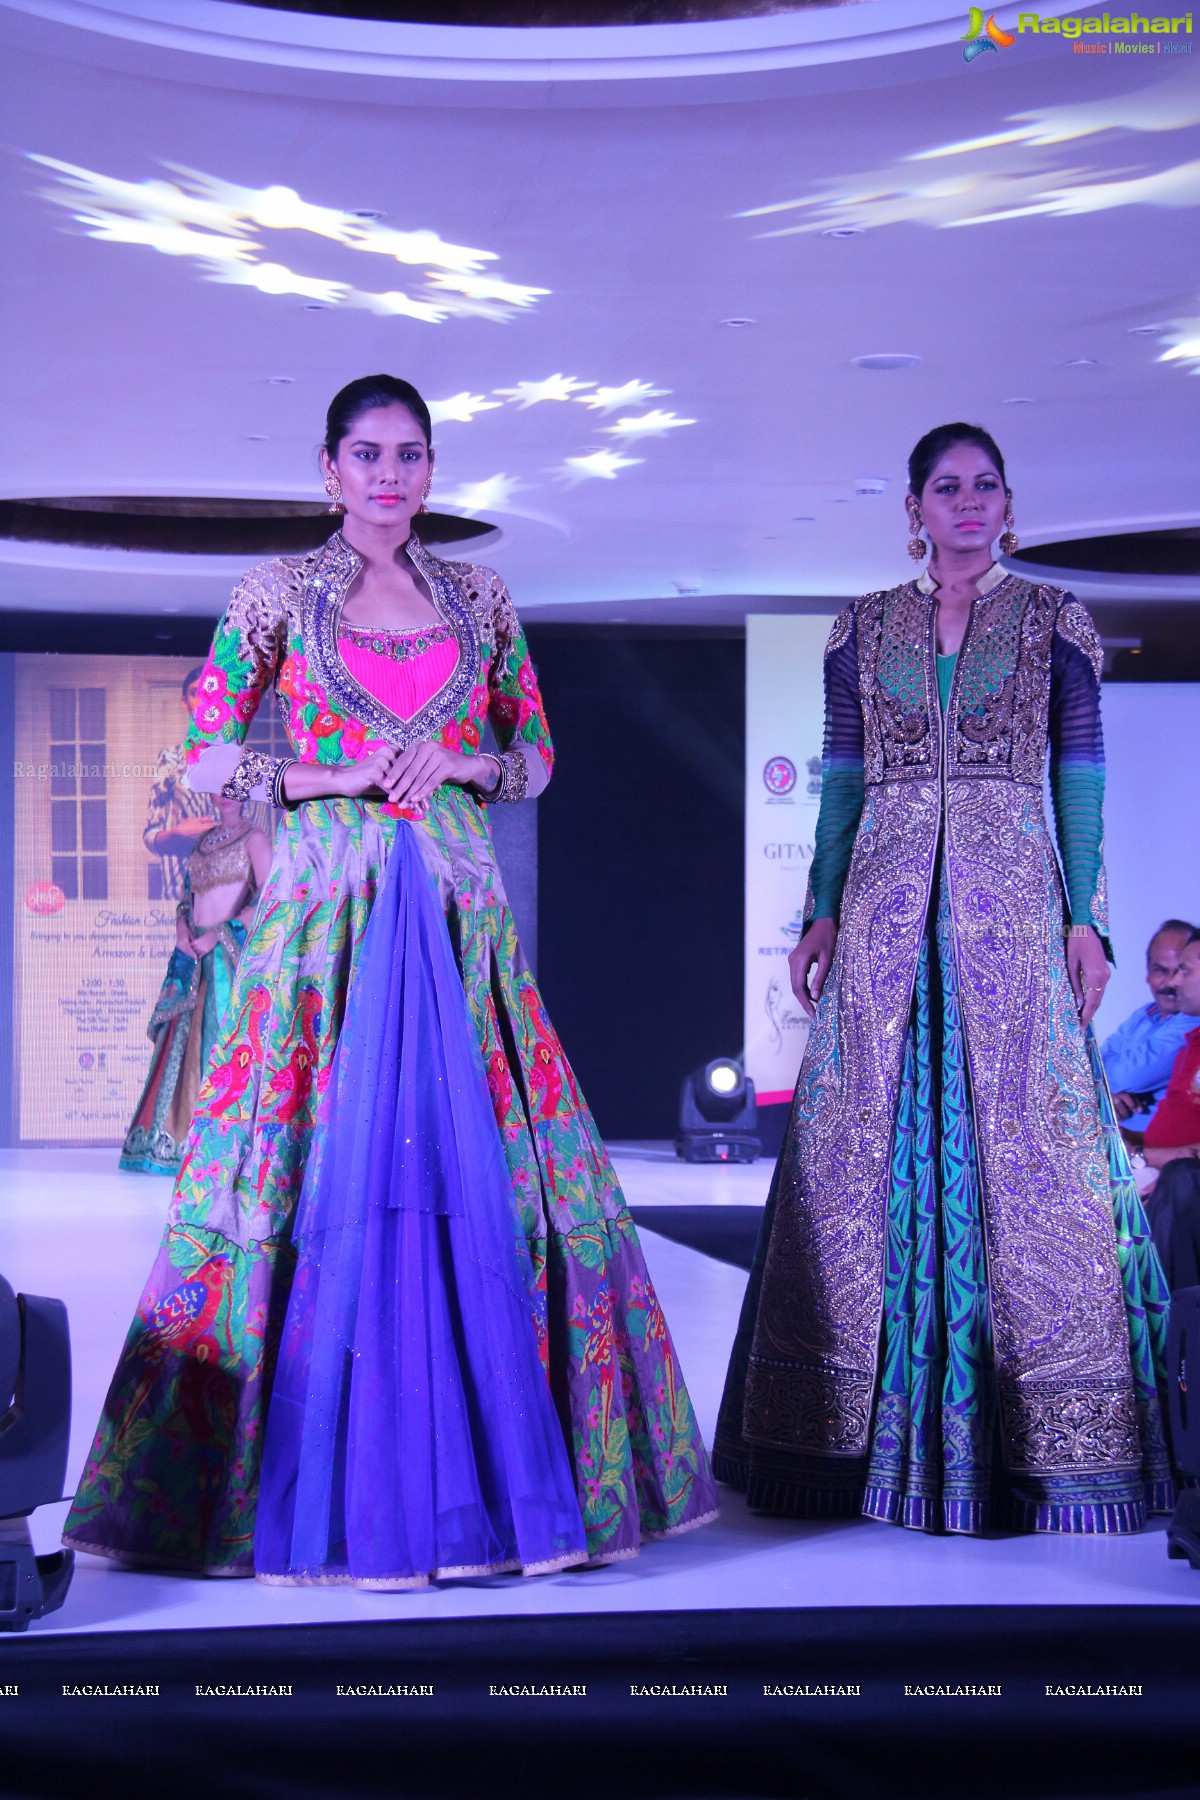 Vedha Fashion Show and Exhibition (Evening Session), Hyderabad